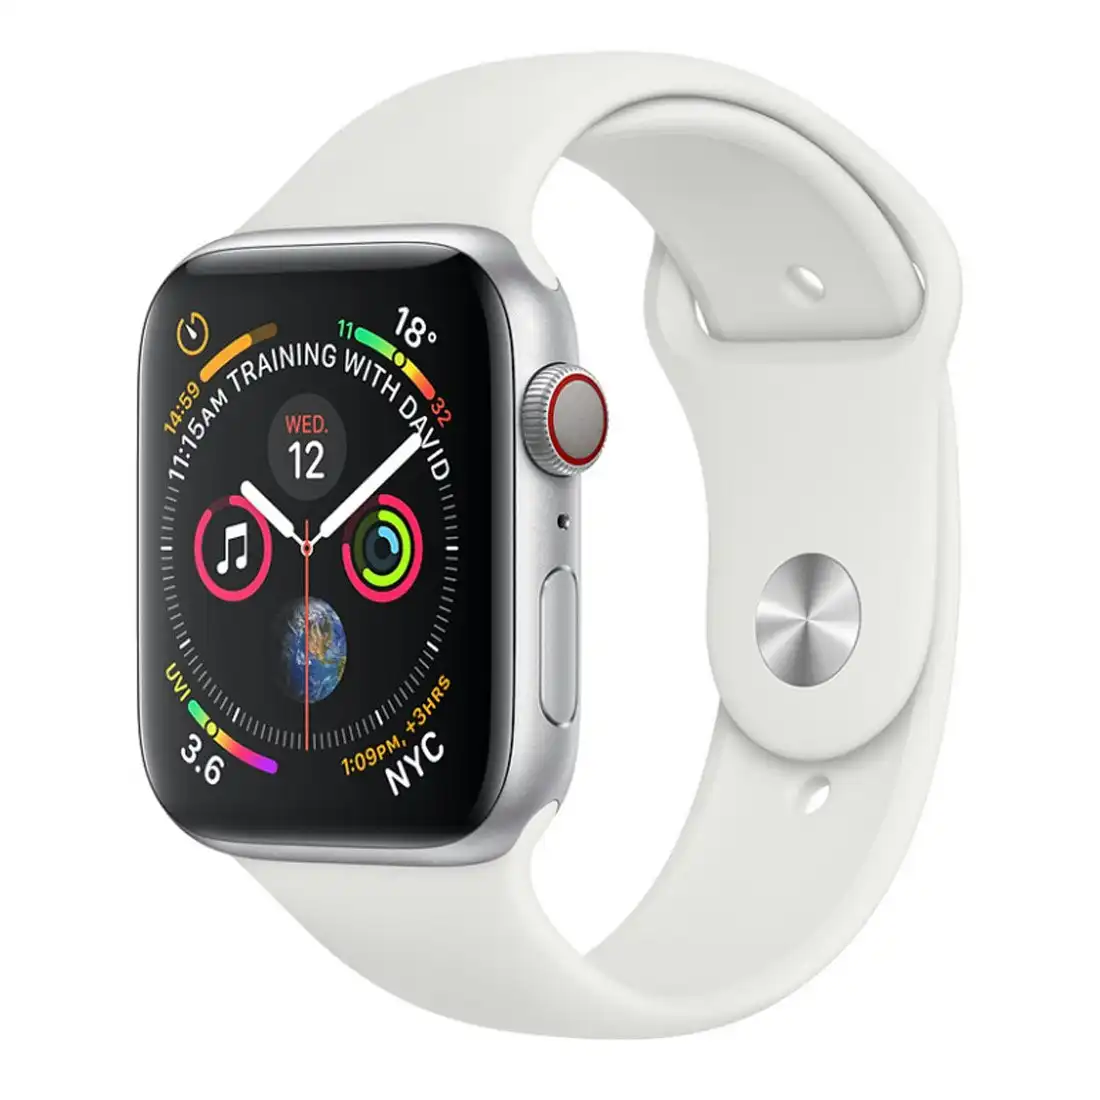 Apple Watch 44mm S4 (Cellular) - Silver Al Case w/ White Sport Band [Refurbished] - As New